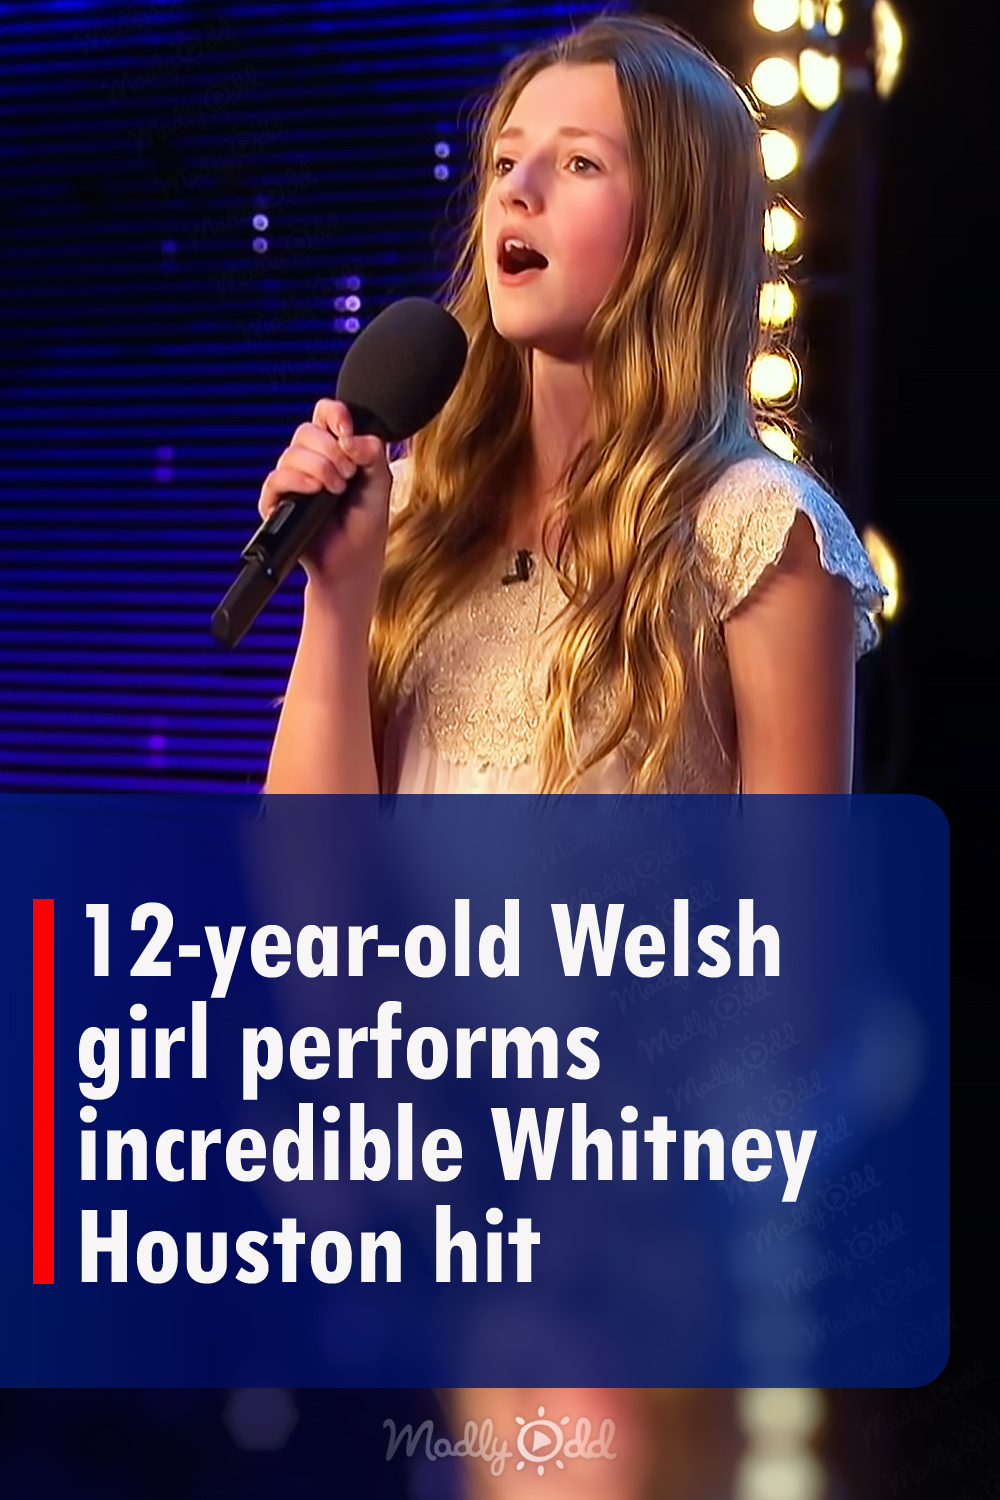 12-year-old Welsh girl performs incredible Whitney Houston hit